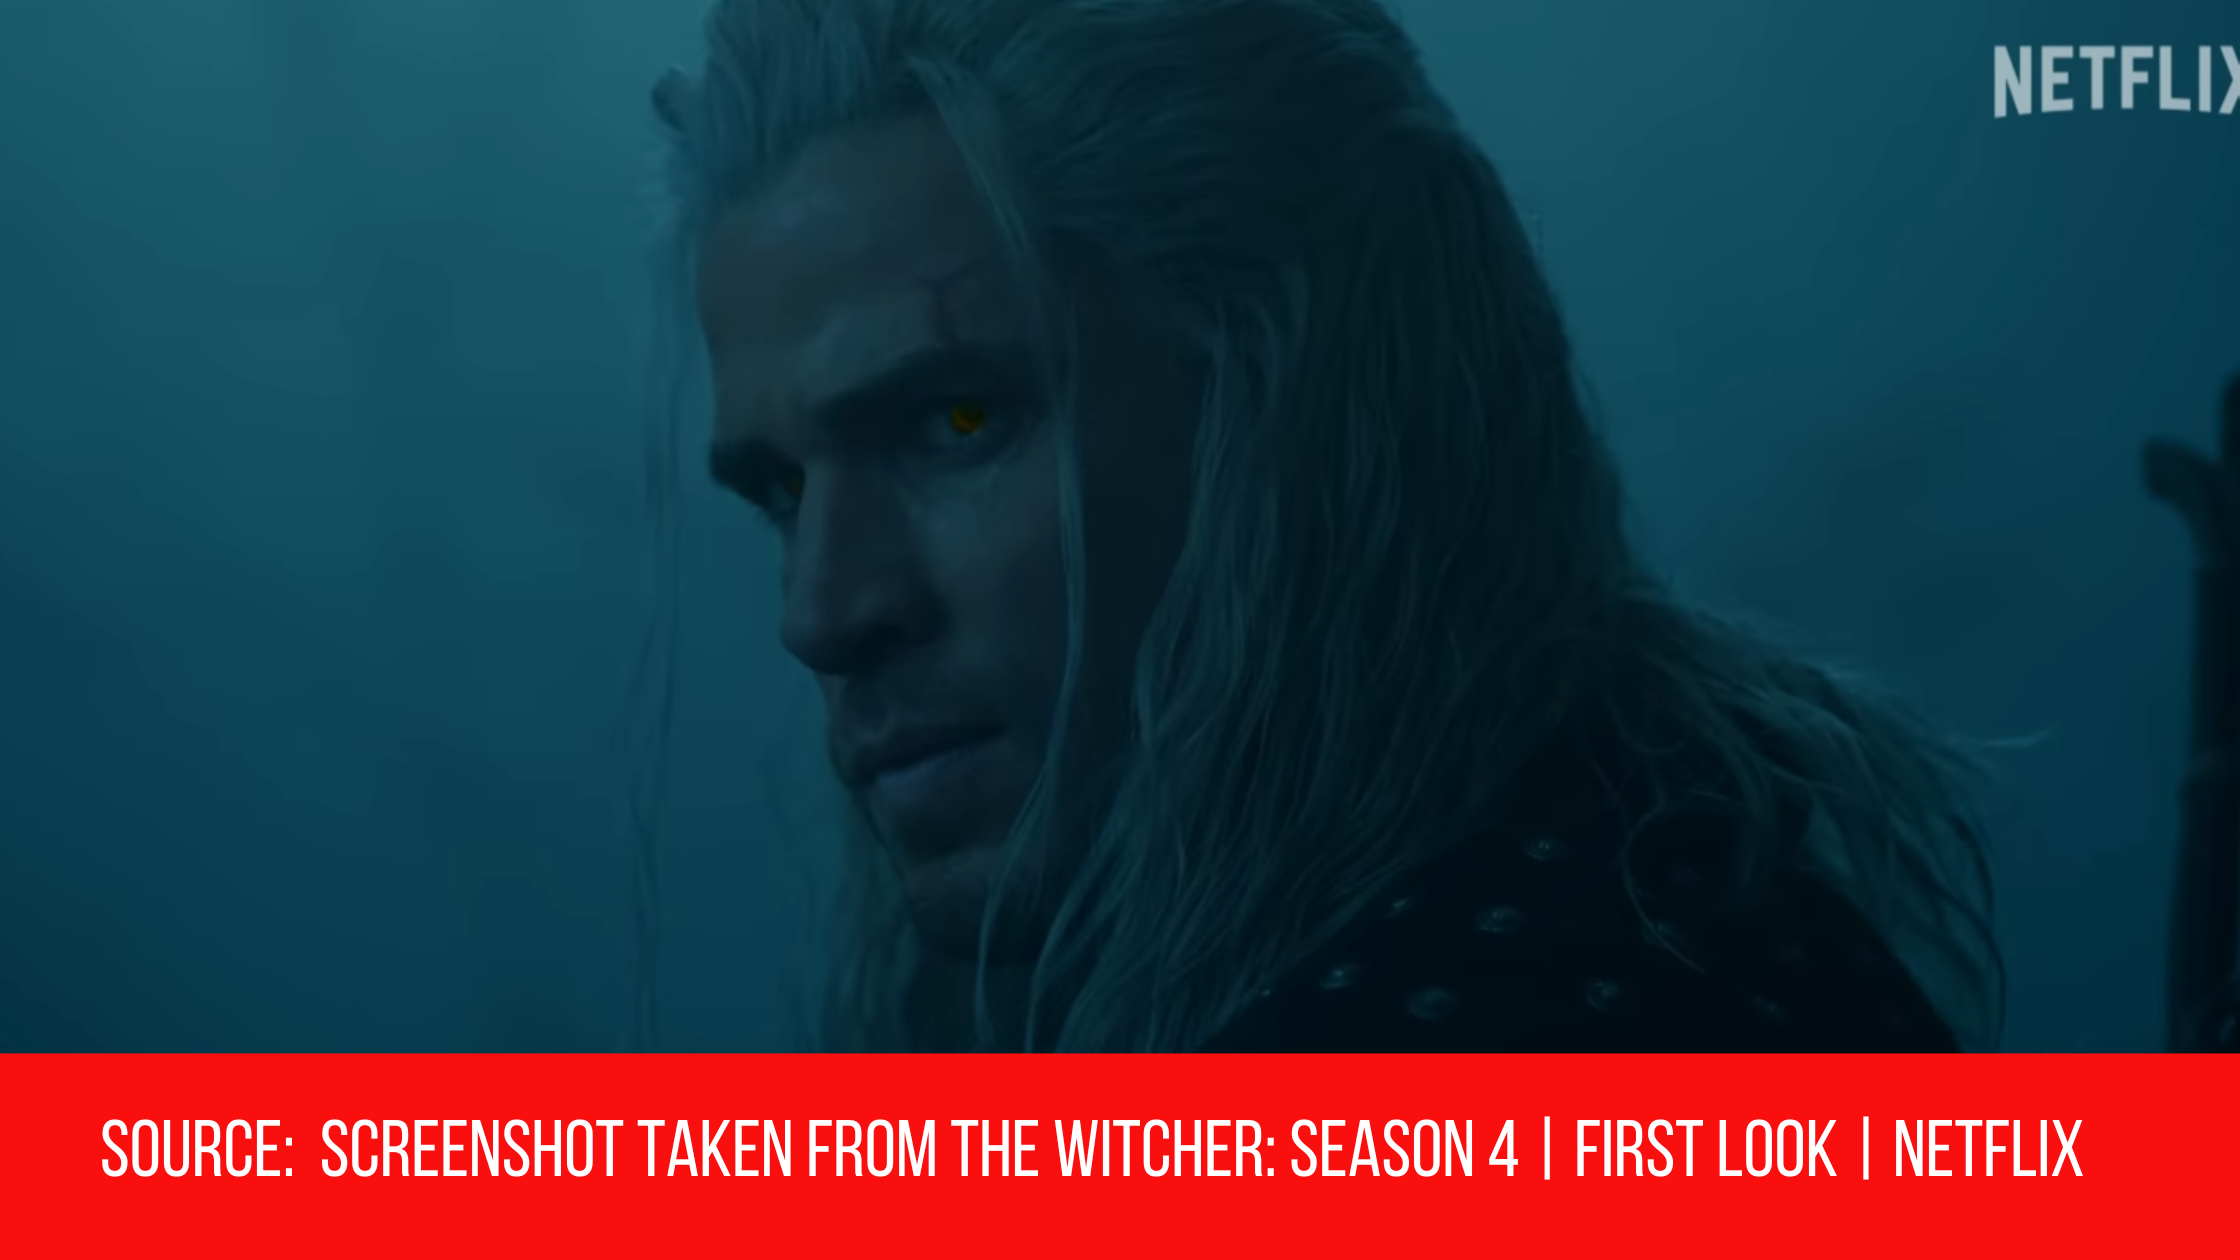 The Witcher: Season 4 First Look out today By Netflix